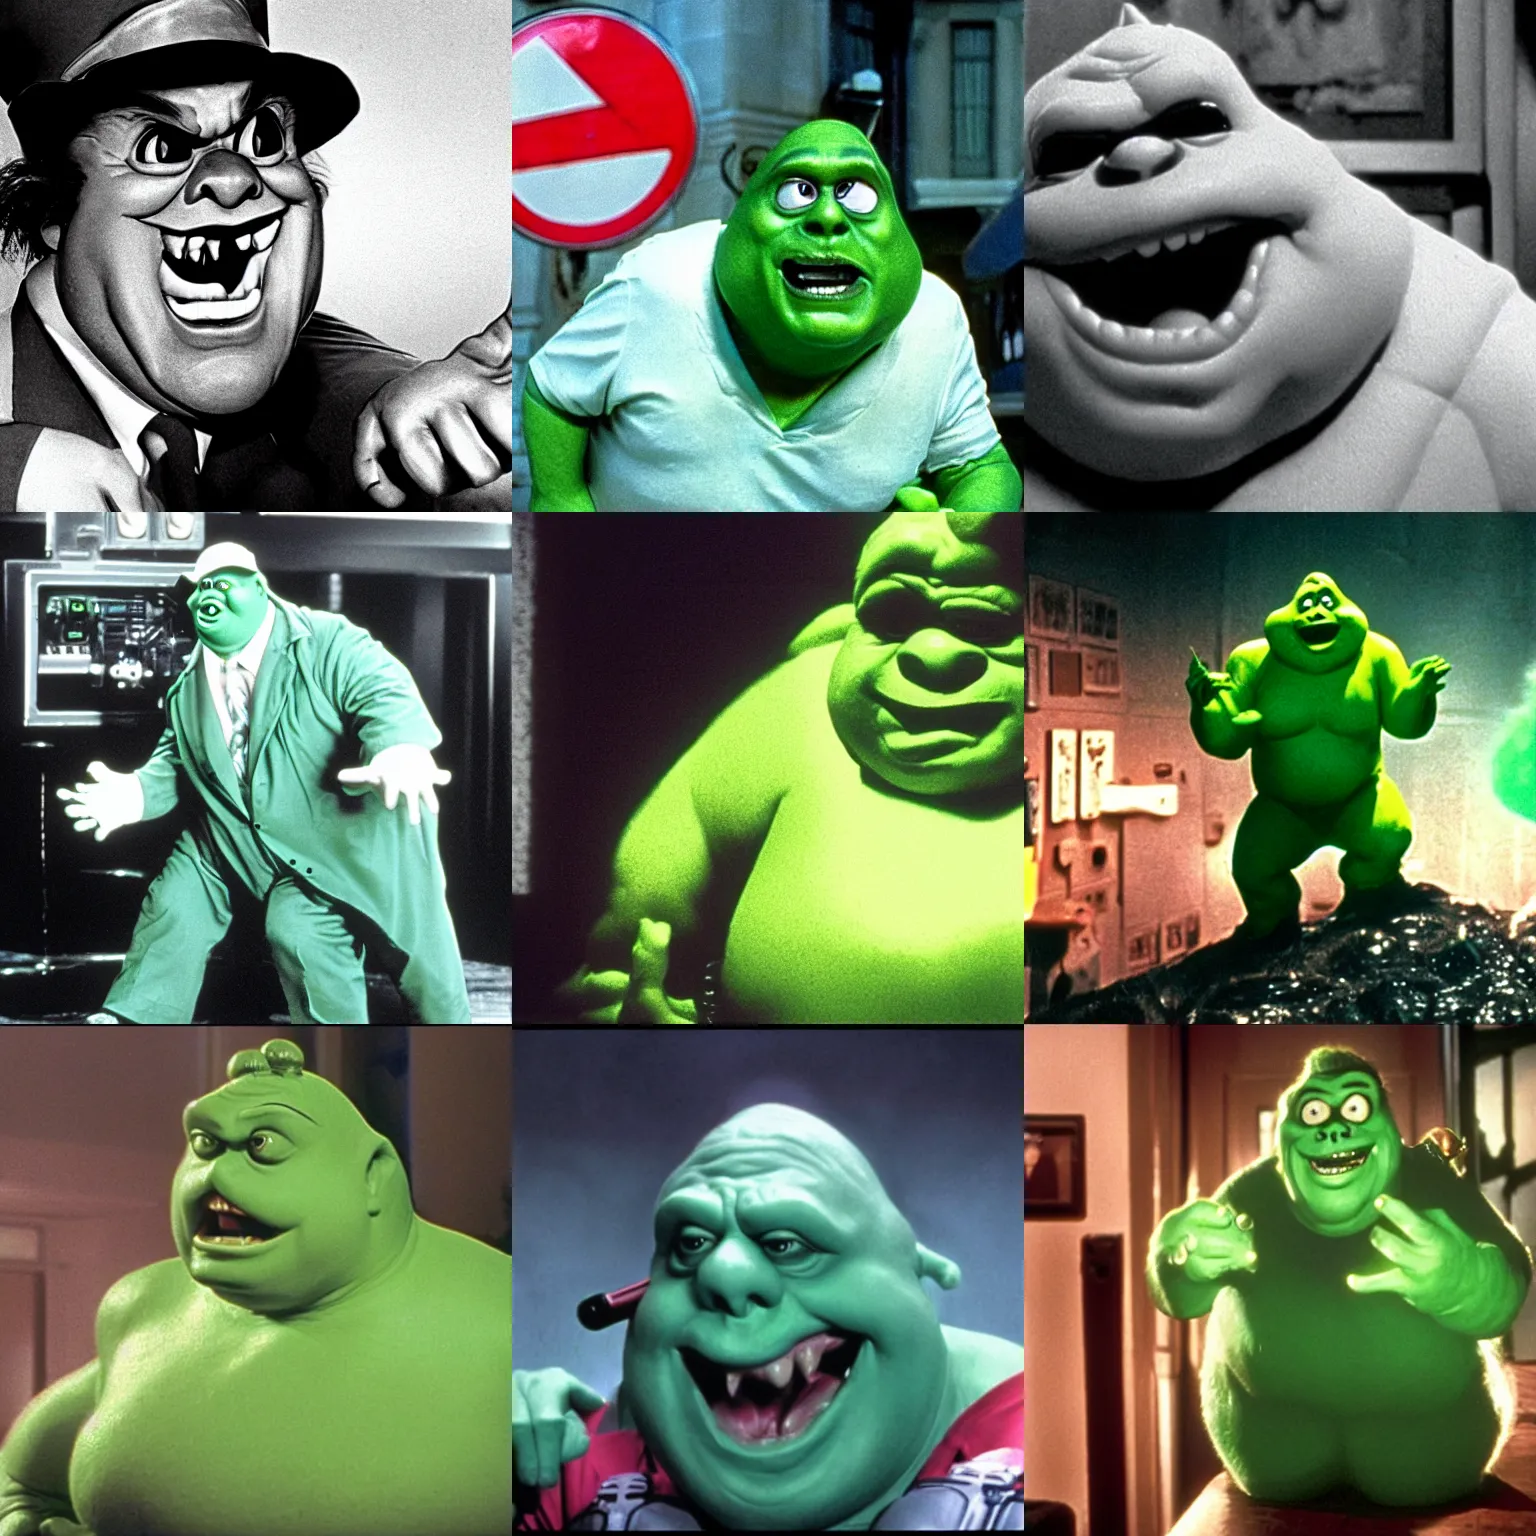 Prompt: < film still > slimer from ghostbusters... by danny devito < / film >